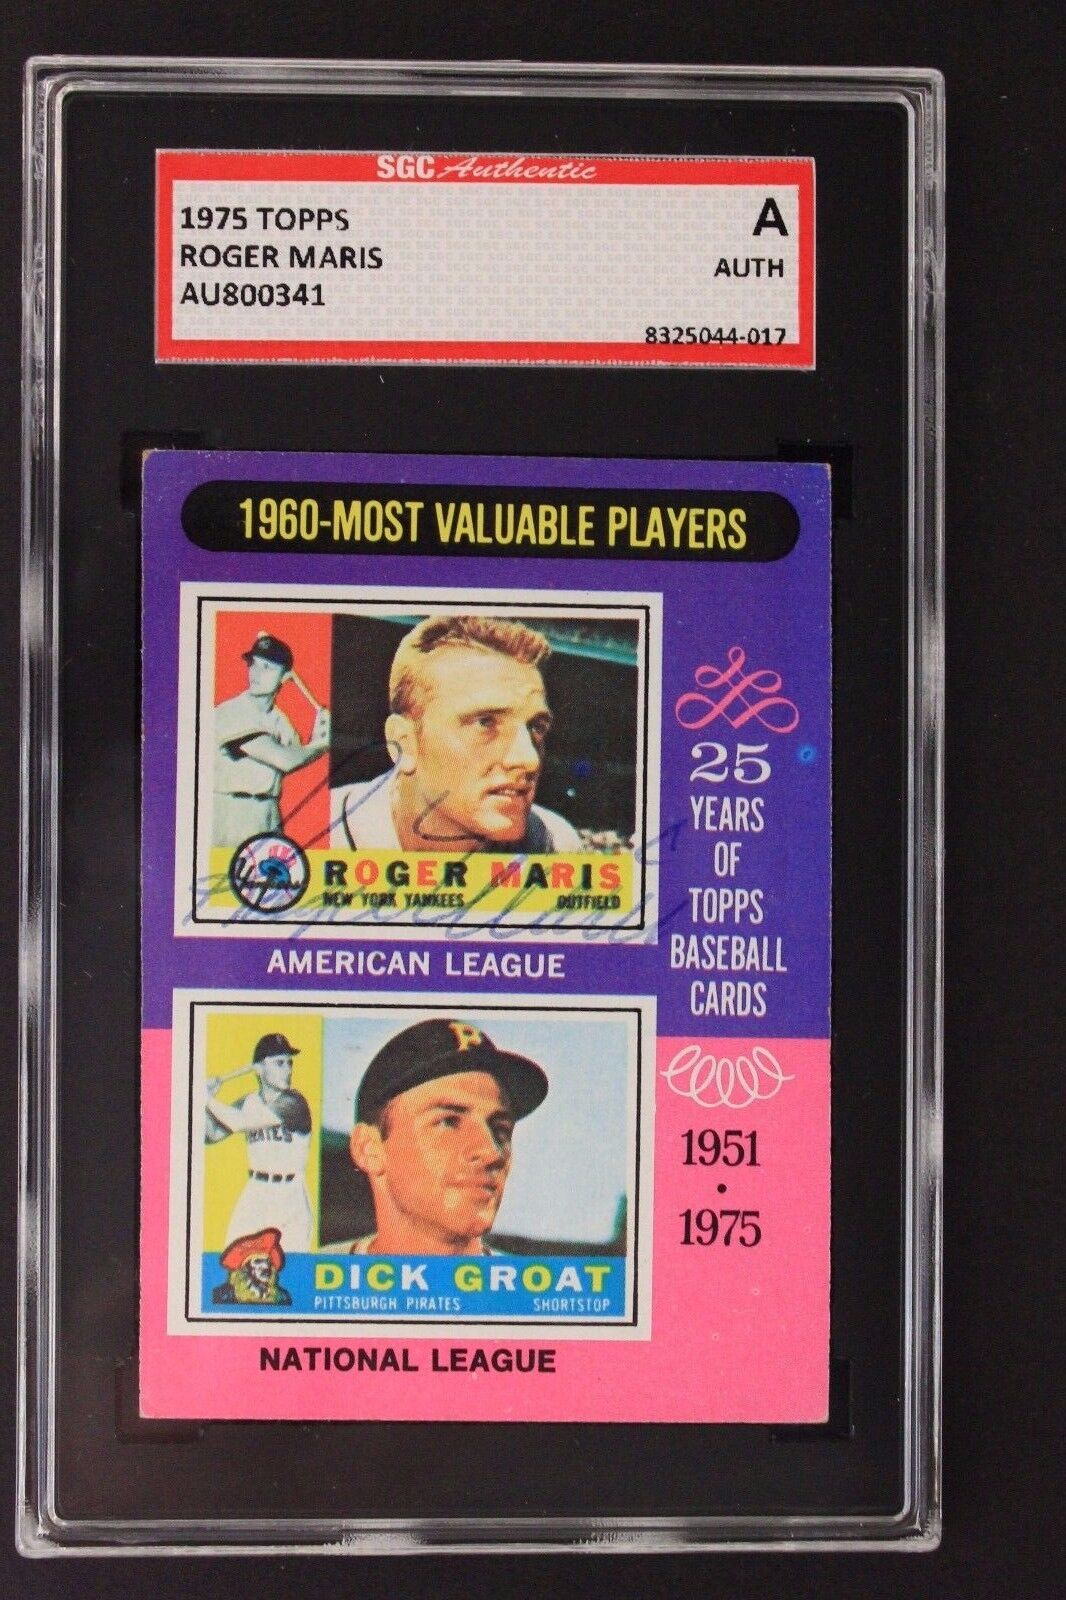 ROGER MARIS (d.1985) 1975 TOPPS MVP Autographed Signed Card SGC Authentic